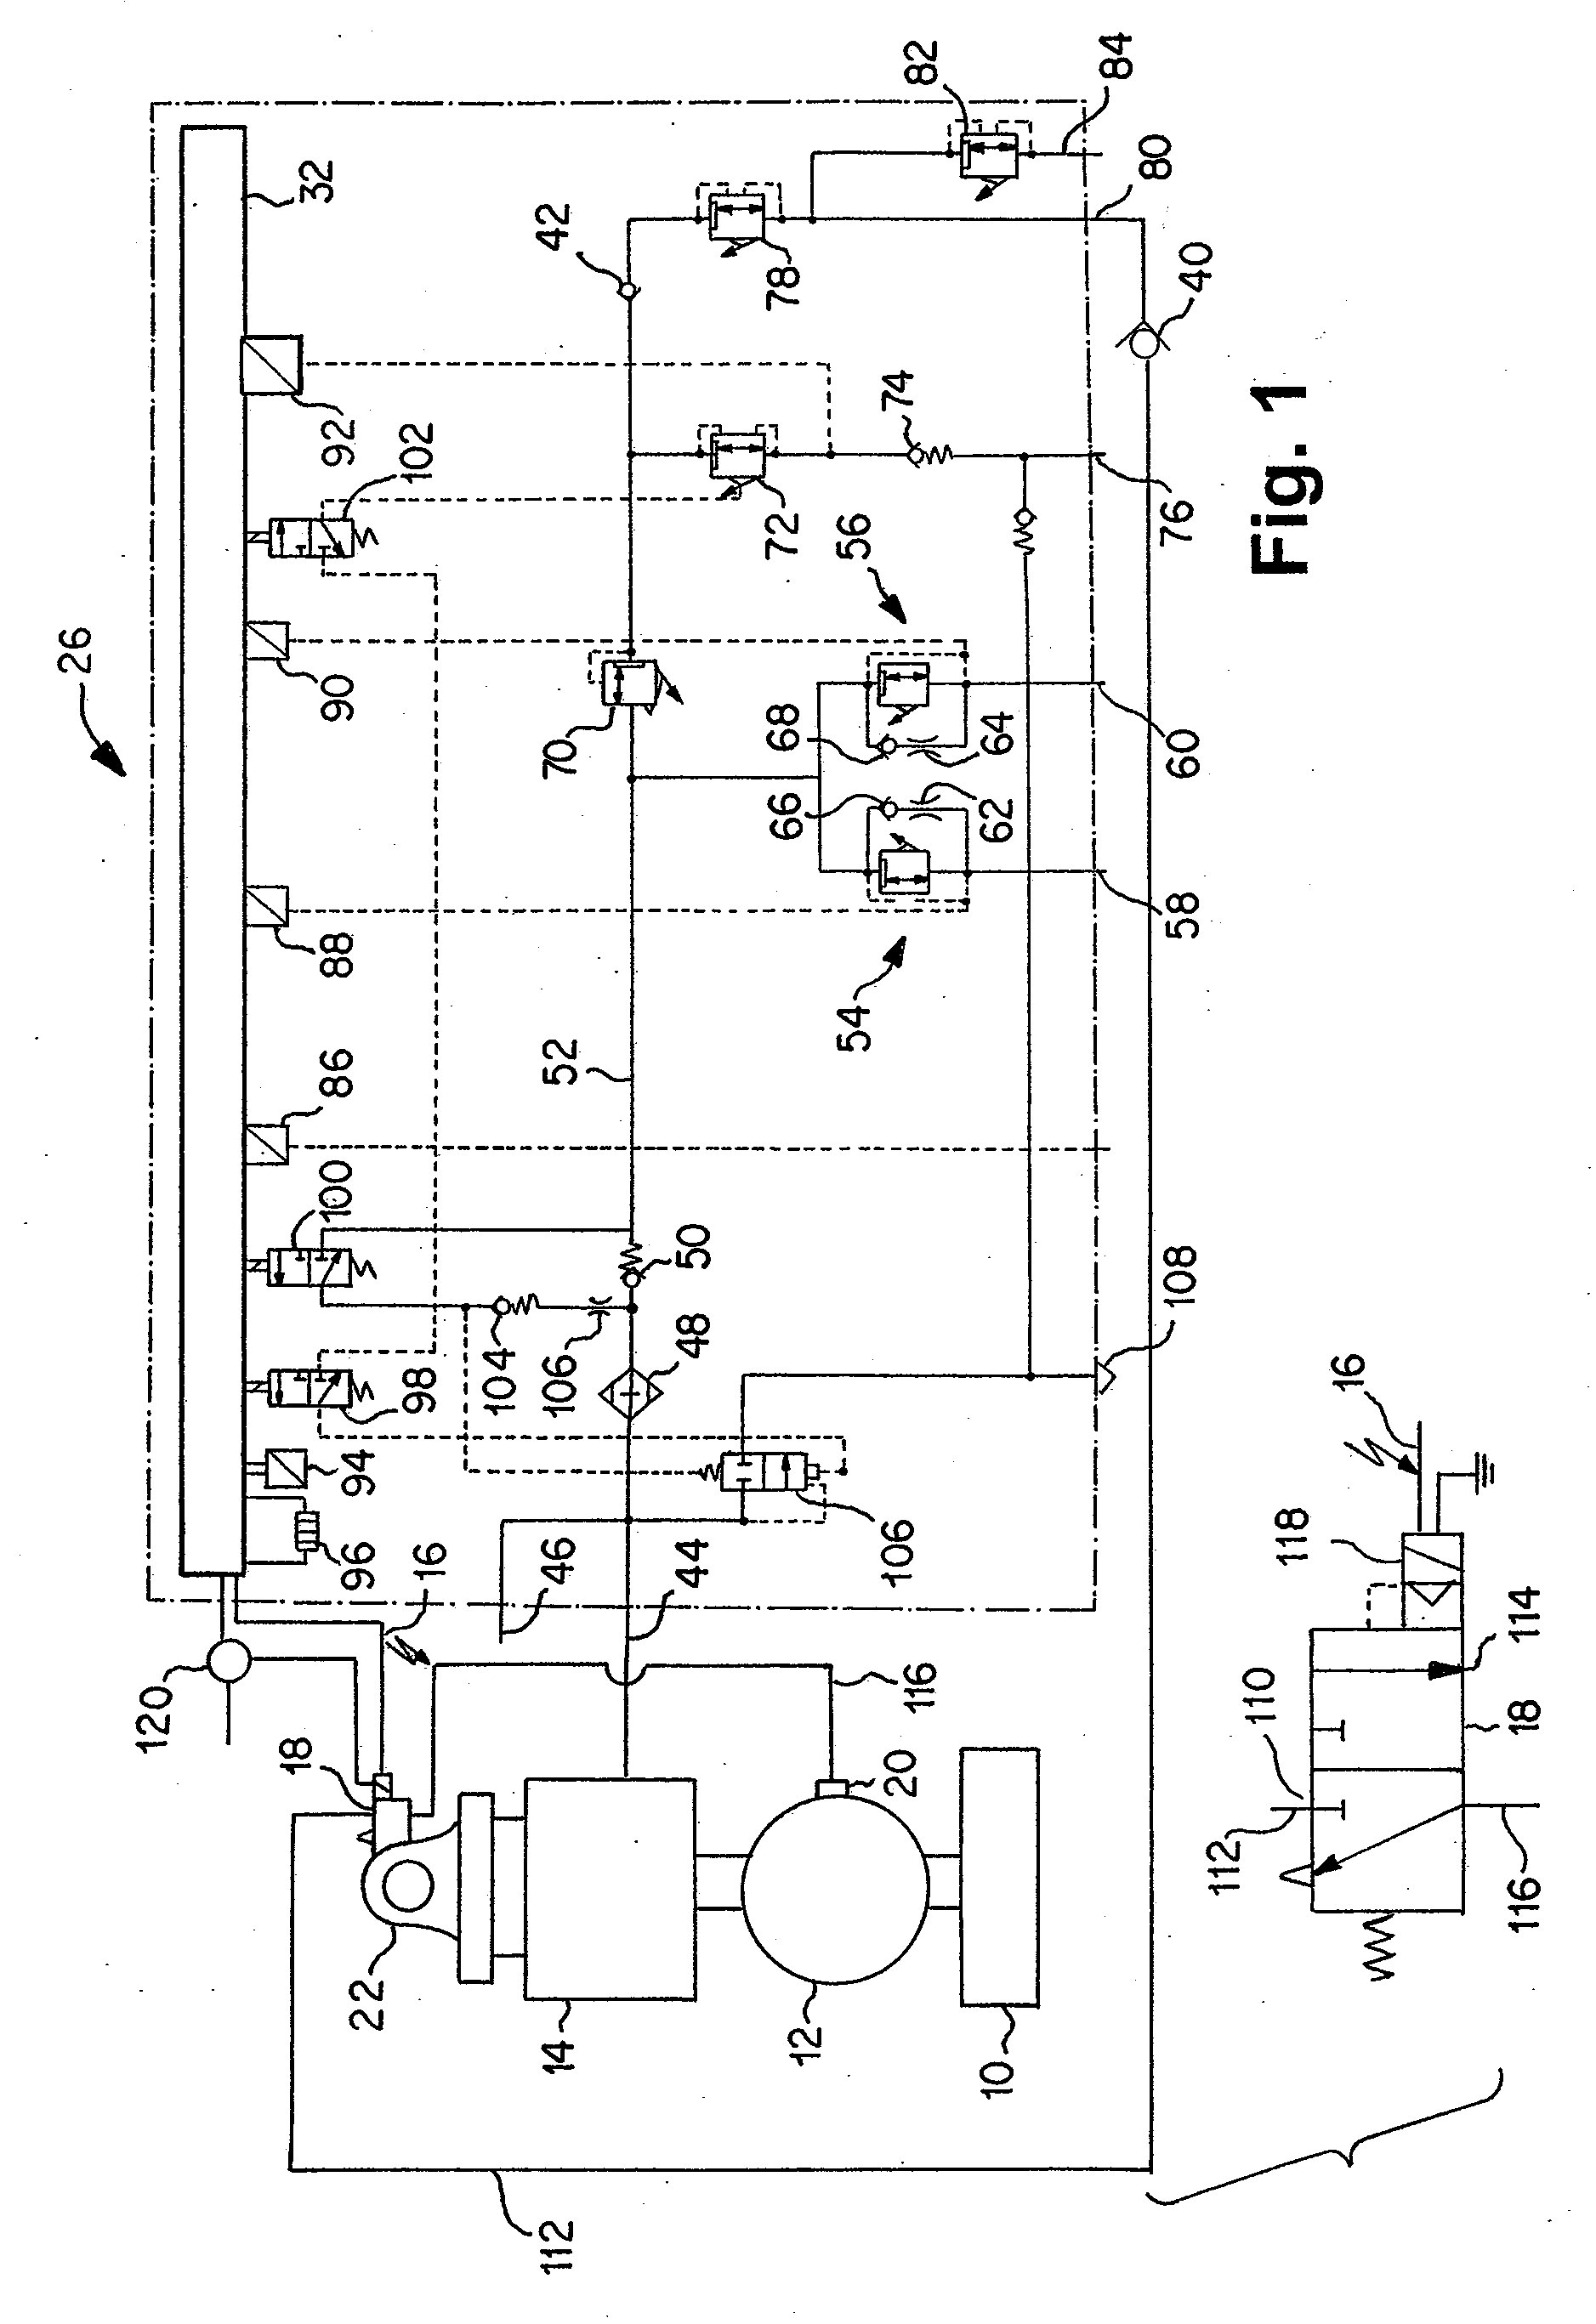 Method for Controlling or Regulating the Air Pressure in a Compressed Air Supply Device